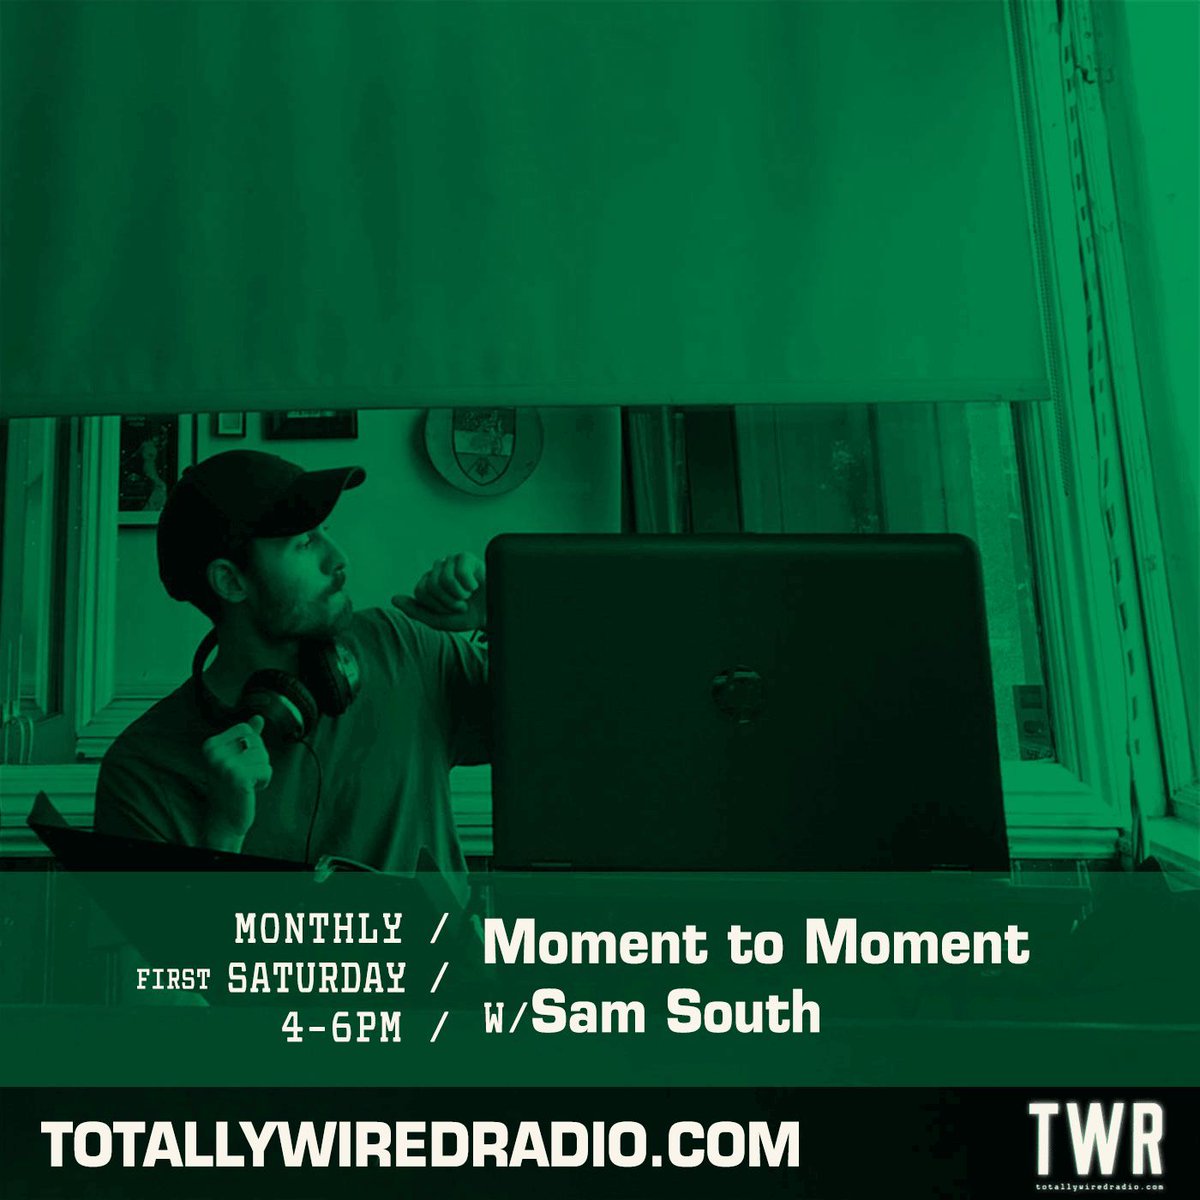 Moment to Moment with Sam South #startingsoon on #TotallyWiredRadio Listen @ Link in bio. 
-
#MusicIsLife #London
-
#Soul #Jazz #Reggae #RnB #Experimental